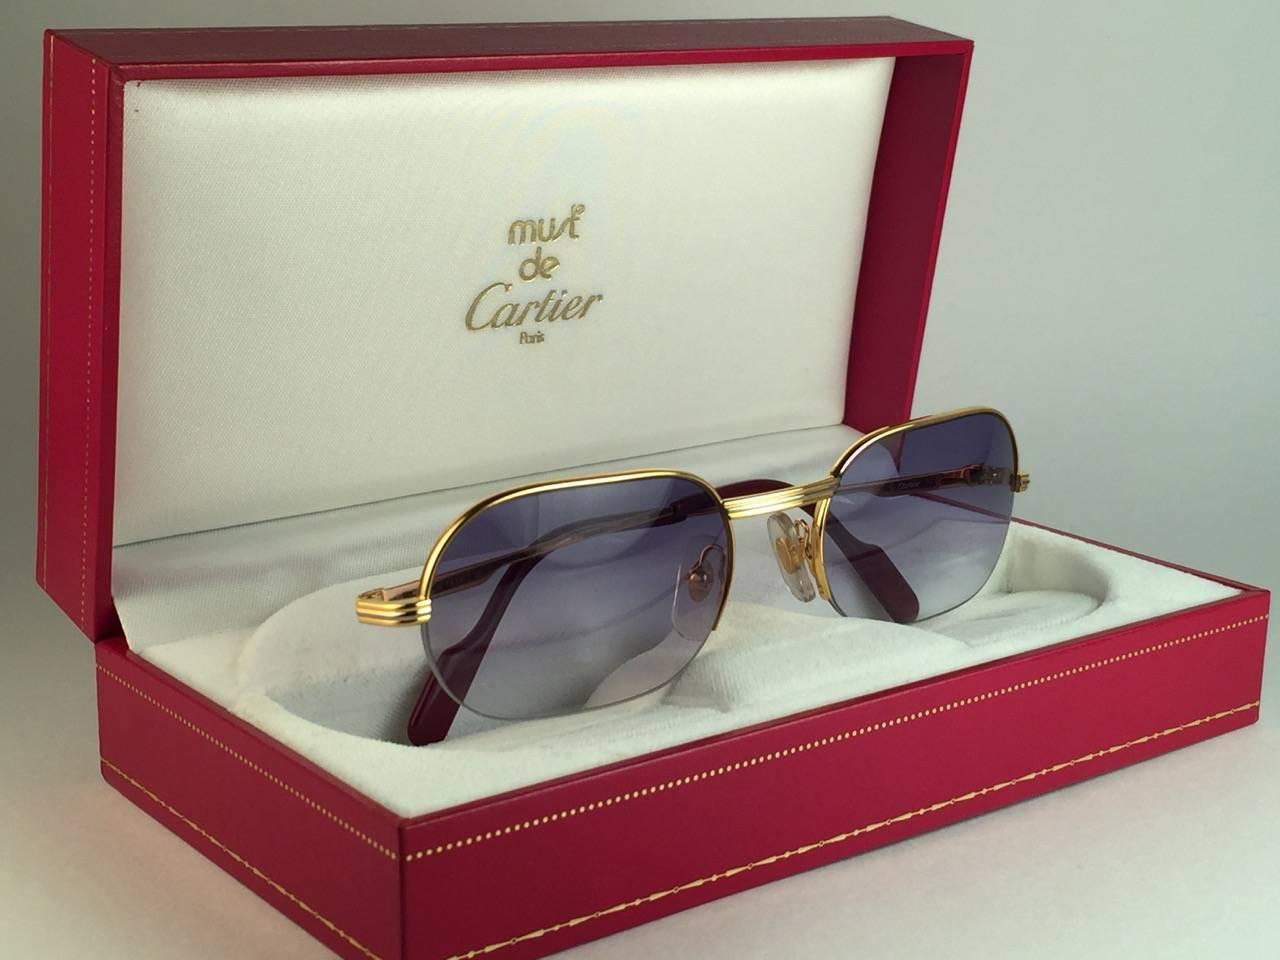 New 1983 Cartier Ascot Vendome Gold 53mm Half Frame with blue gradient (uv protection) lenses. 
Frame is with the front and sides in white and yellow gold heavy 18k plated accents. All hallmarks. Burgundy with Cartier gold signs on the earpaddles.